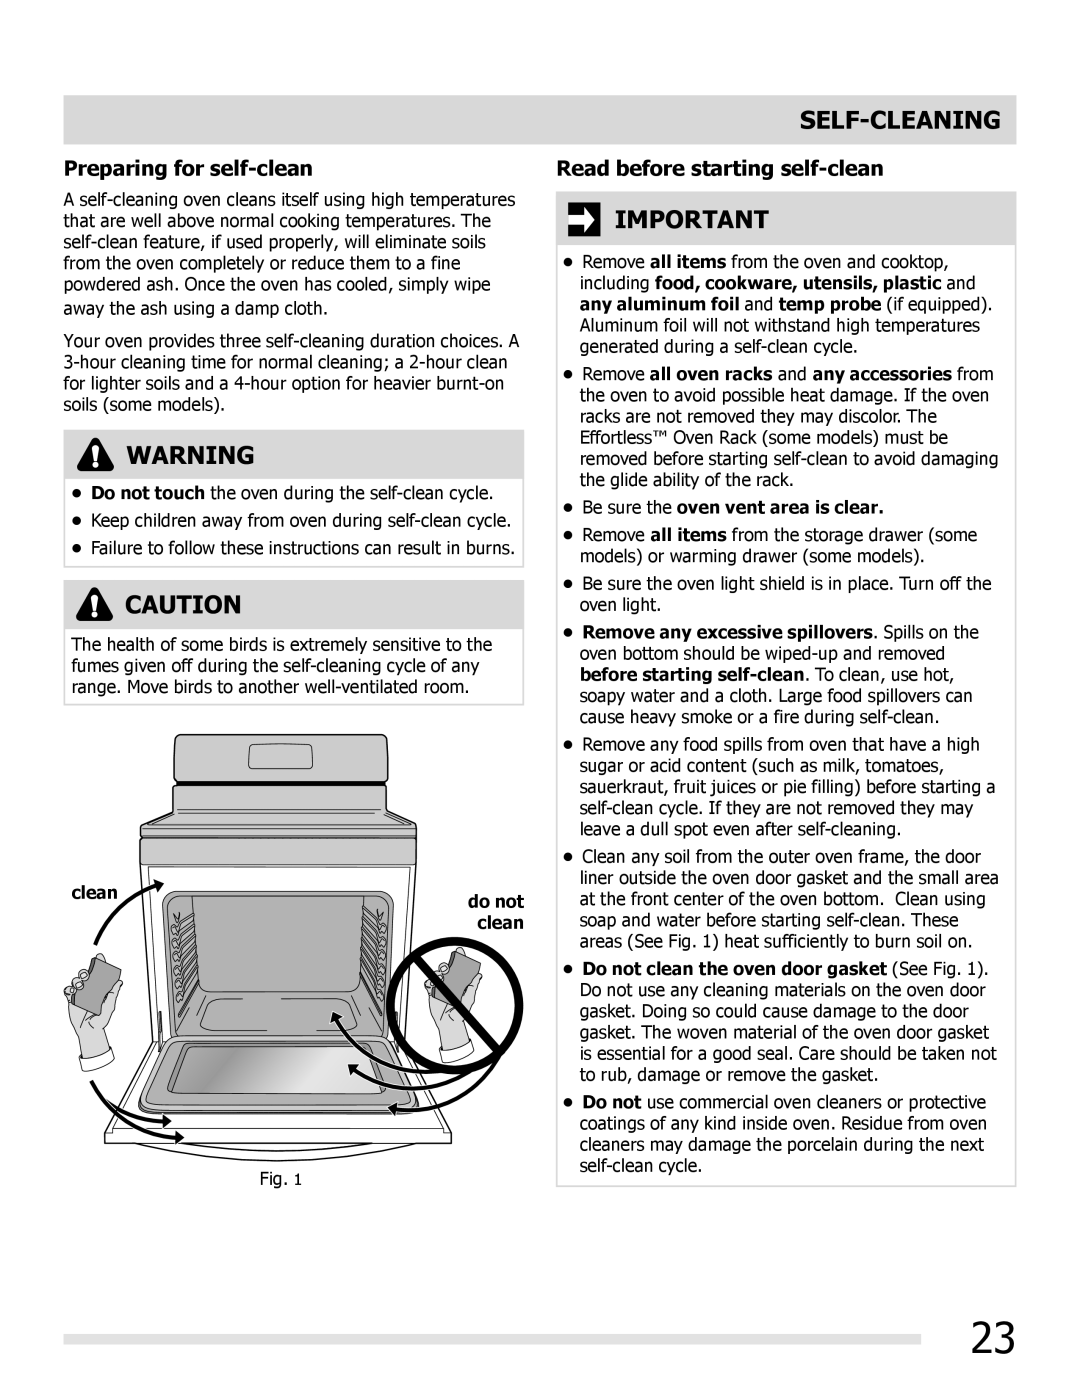 Frigidaire FGGF3032MF, FGGF3032MB manual Self-Cleaning, Preparing for self-clean, Read before starting self-clean, do not 